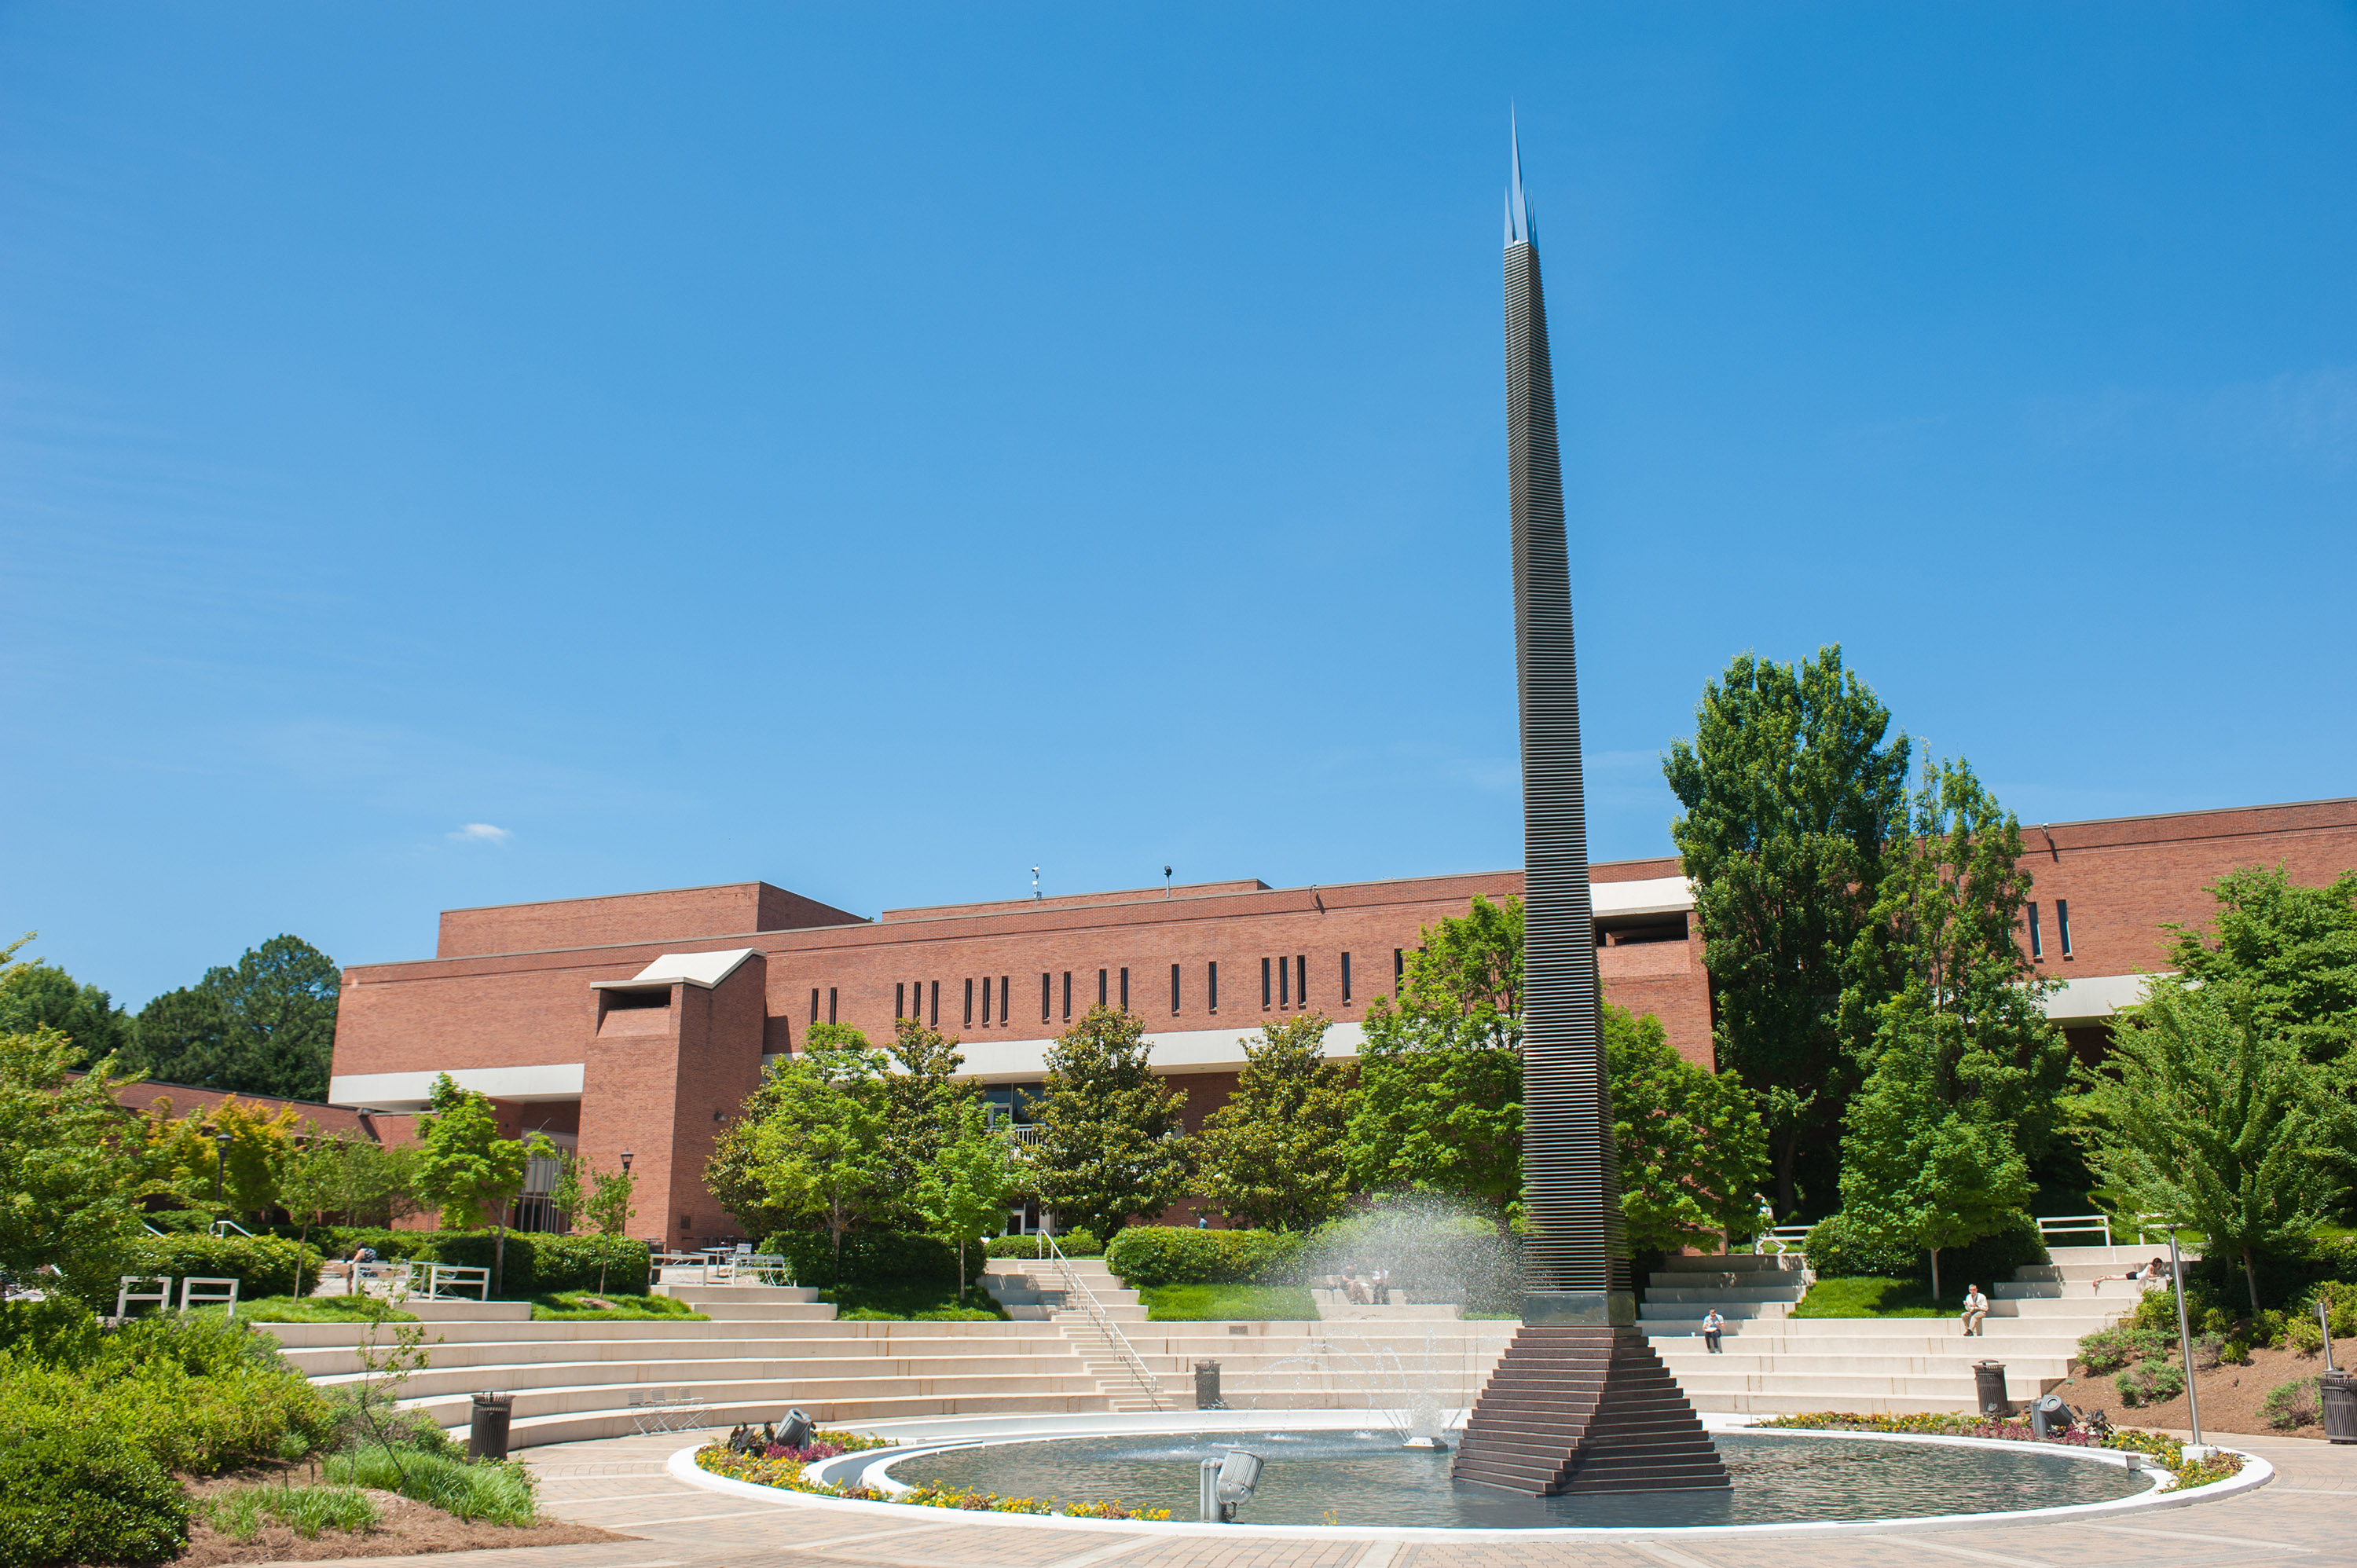 Georgia Tech is ranked 34th among 1,258 world universities in the 2019 Times Higher Education World University Rankings.